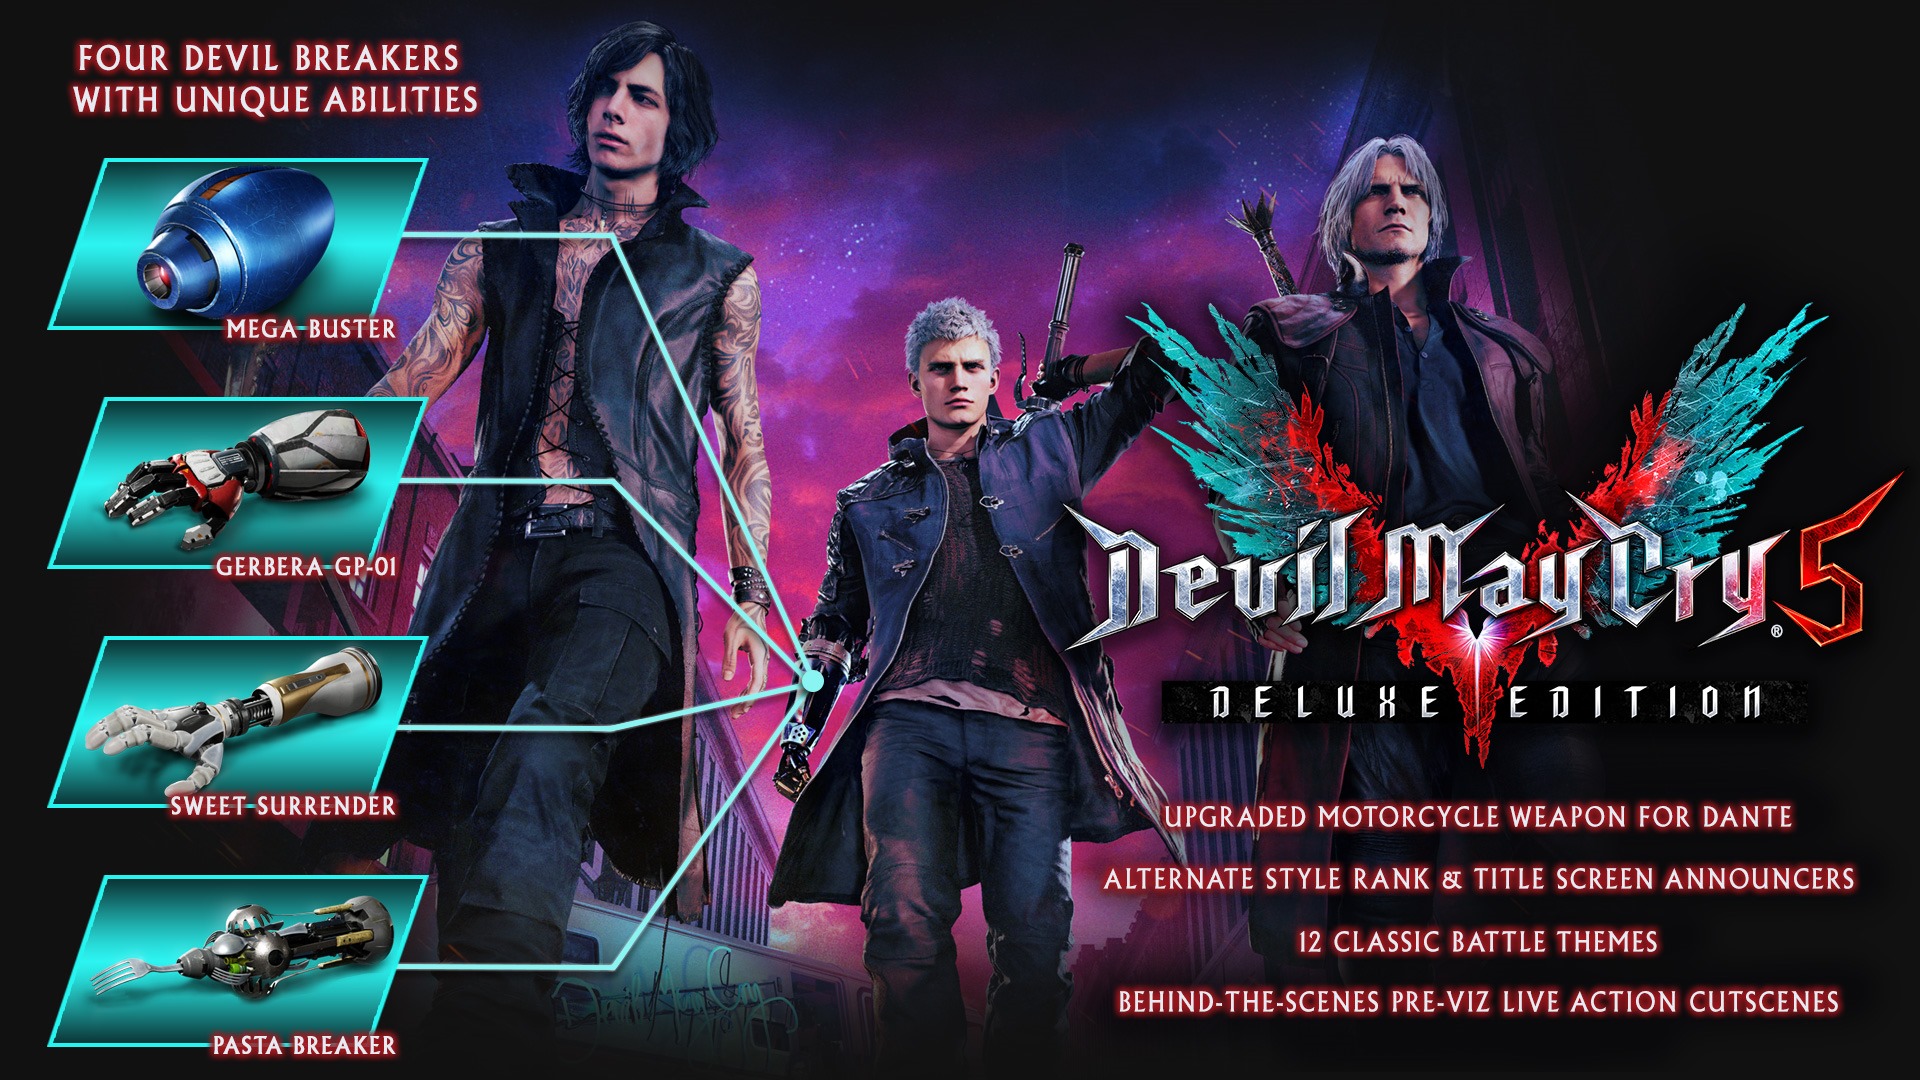 Here S A Breakdown Of Devil May Cry 5 S Deluxe Edition And Its Images, Photos, Reviews